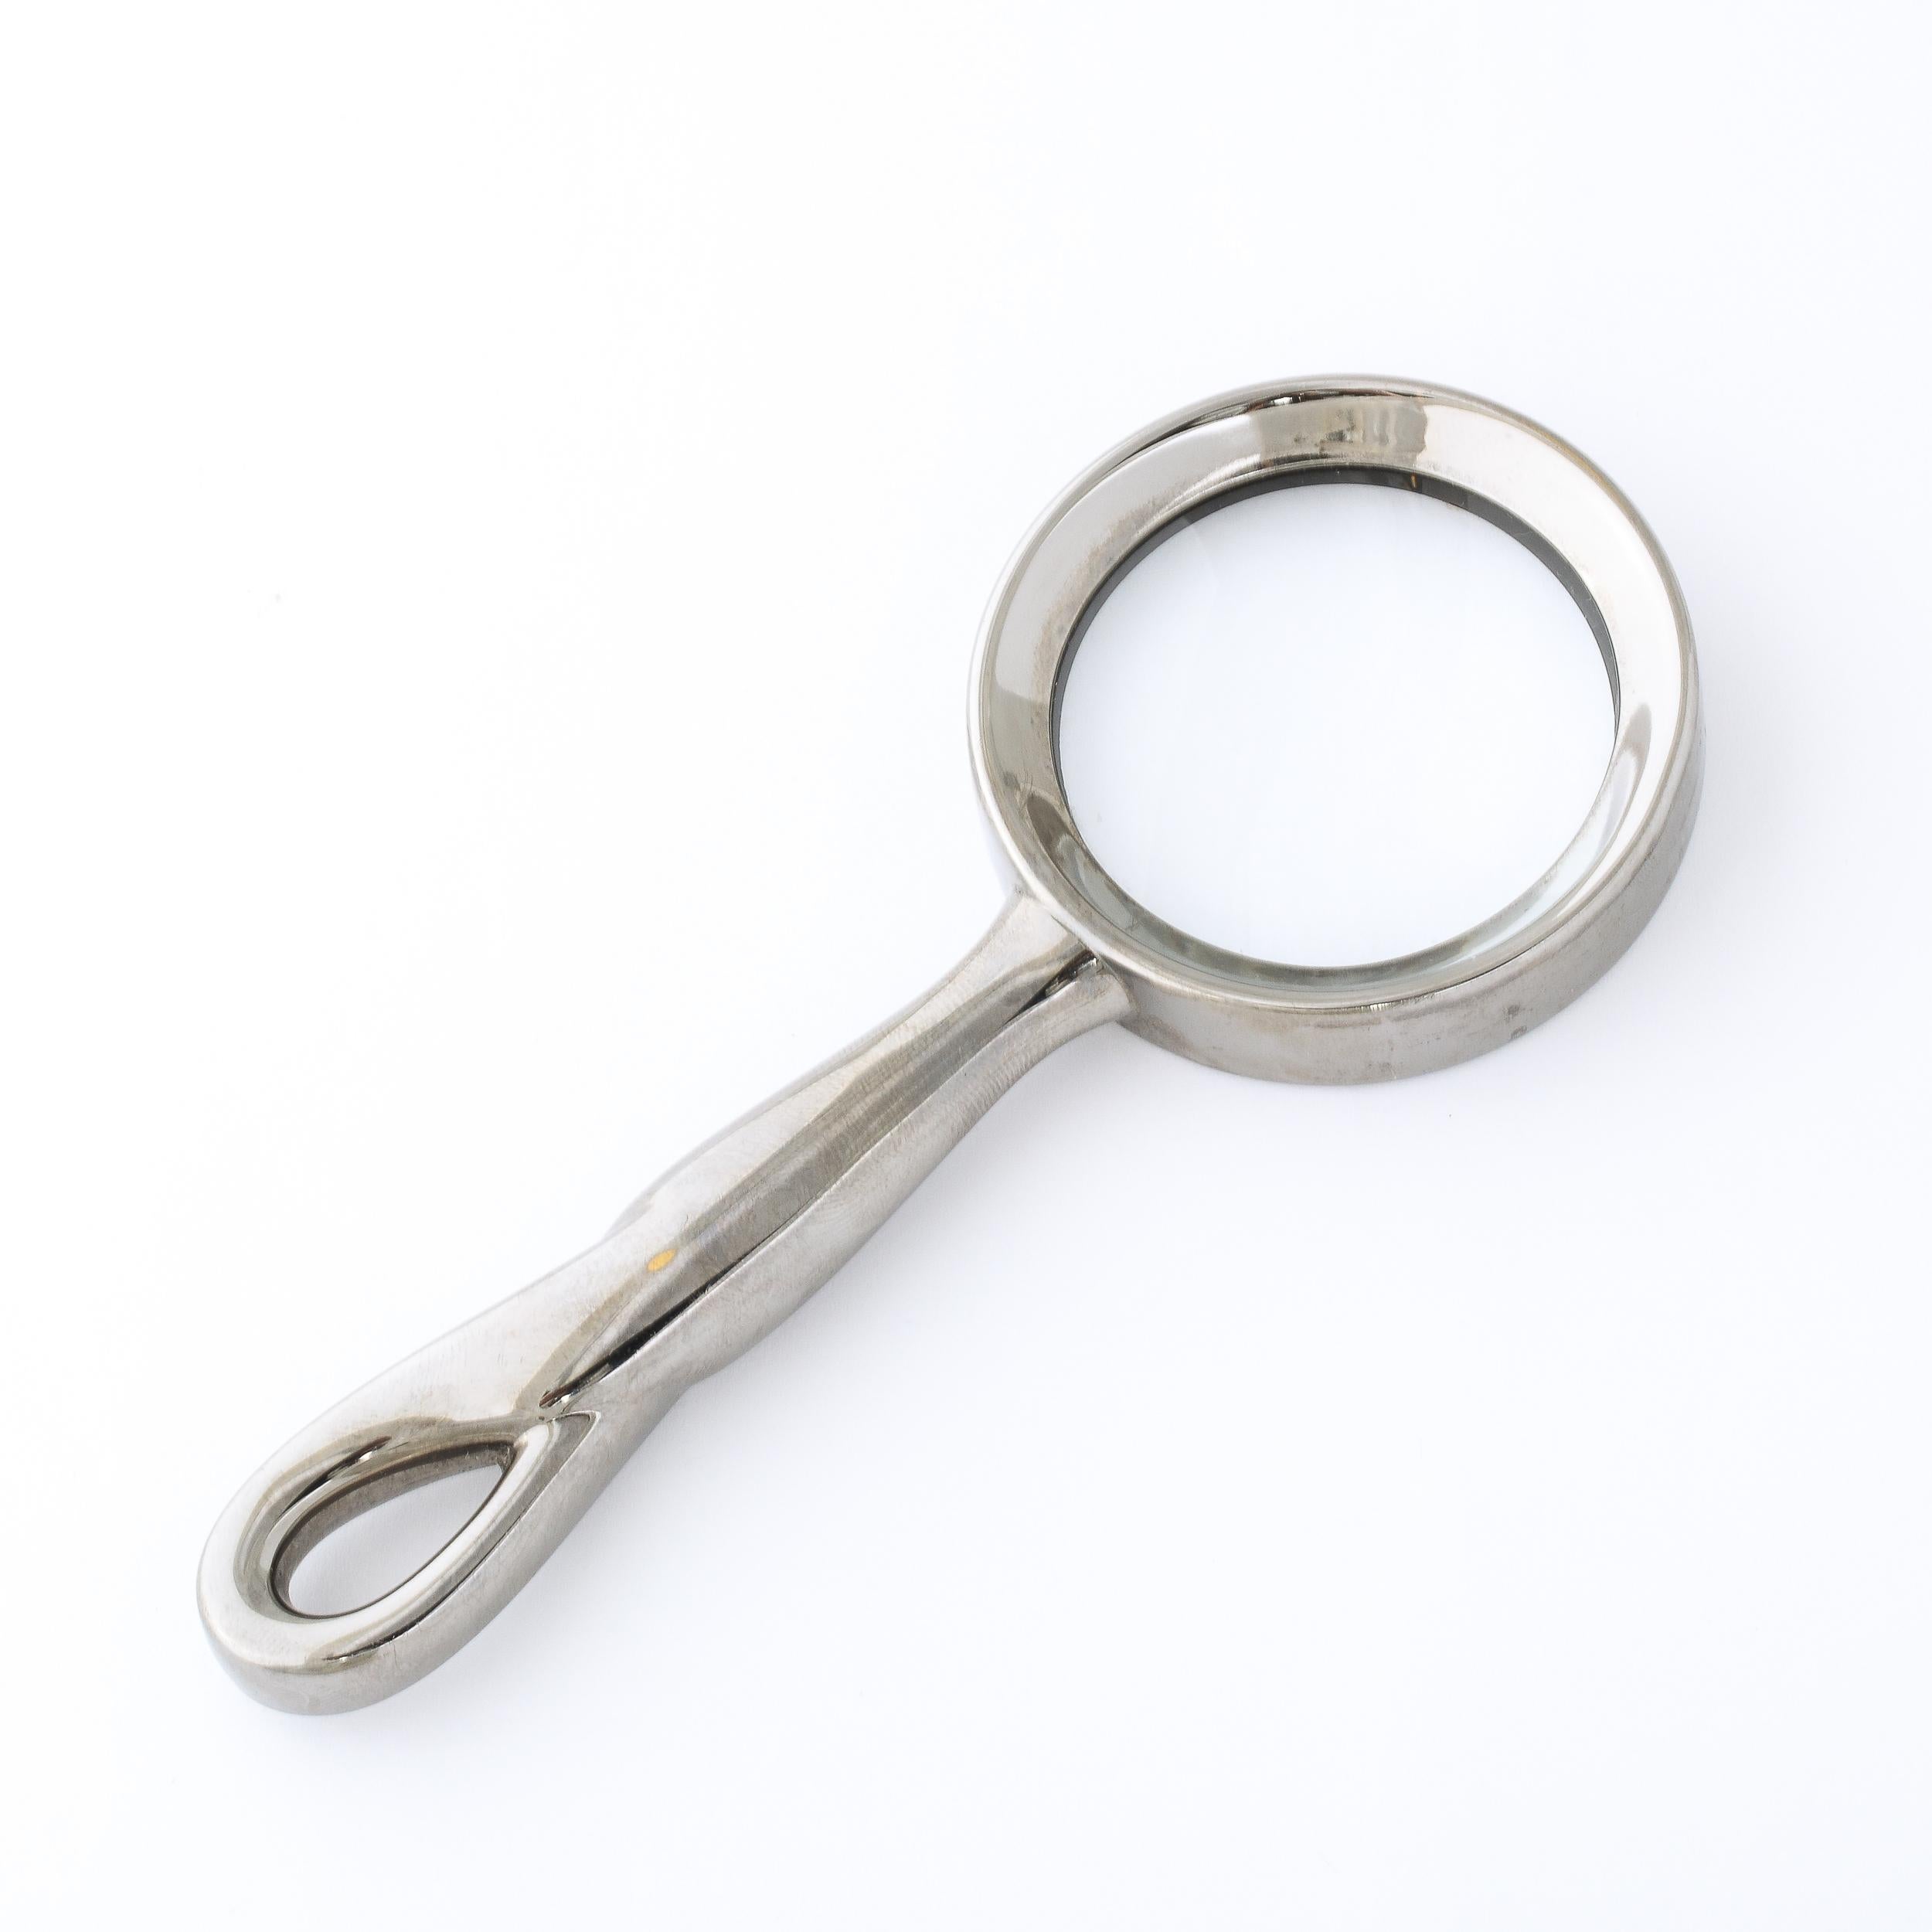 This elegant Modernist Magnifying Glass by Elsa Peretti in the Padova Pattern for Tiffany and Co. originates from the United States, Circa 1985. Featuring a gleaming and absorbing gunmetal finish, the handle is formed in an amorphic sculptural twist